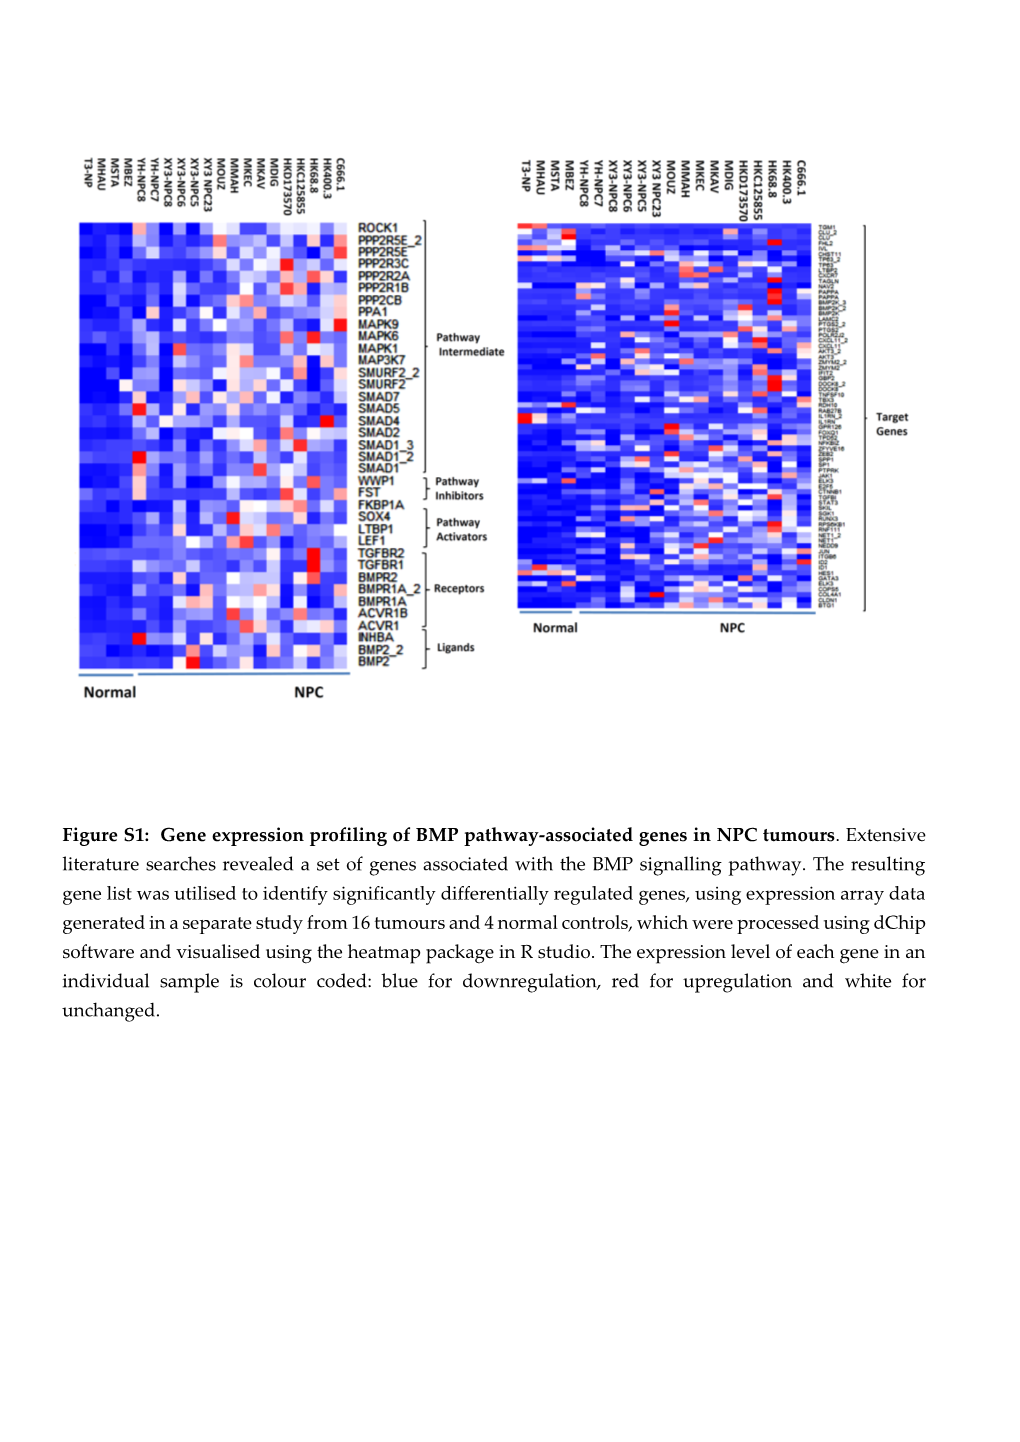 Figure S1: Gene Expression Profiling of BMP Pathway-Associated Genes in NPC Tumours